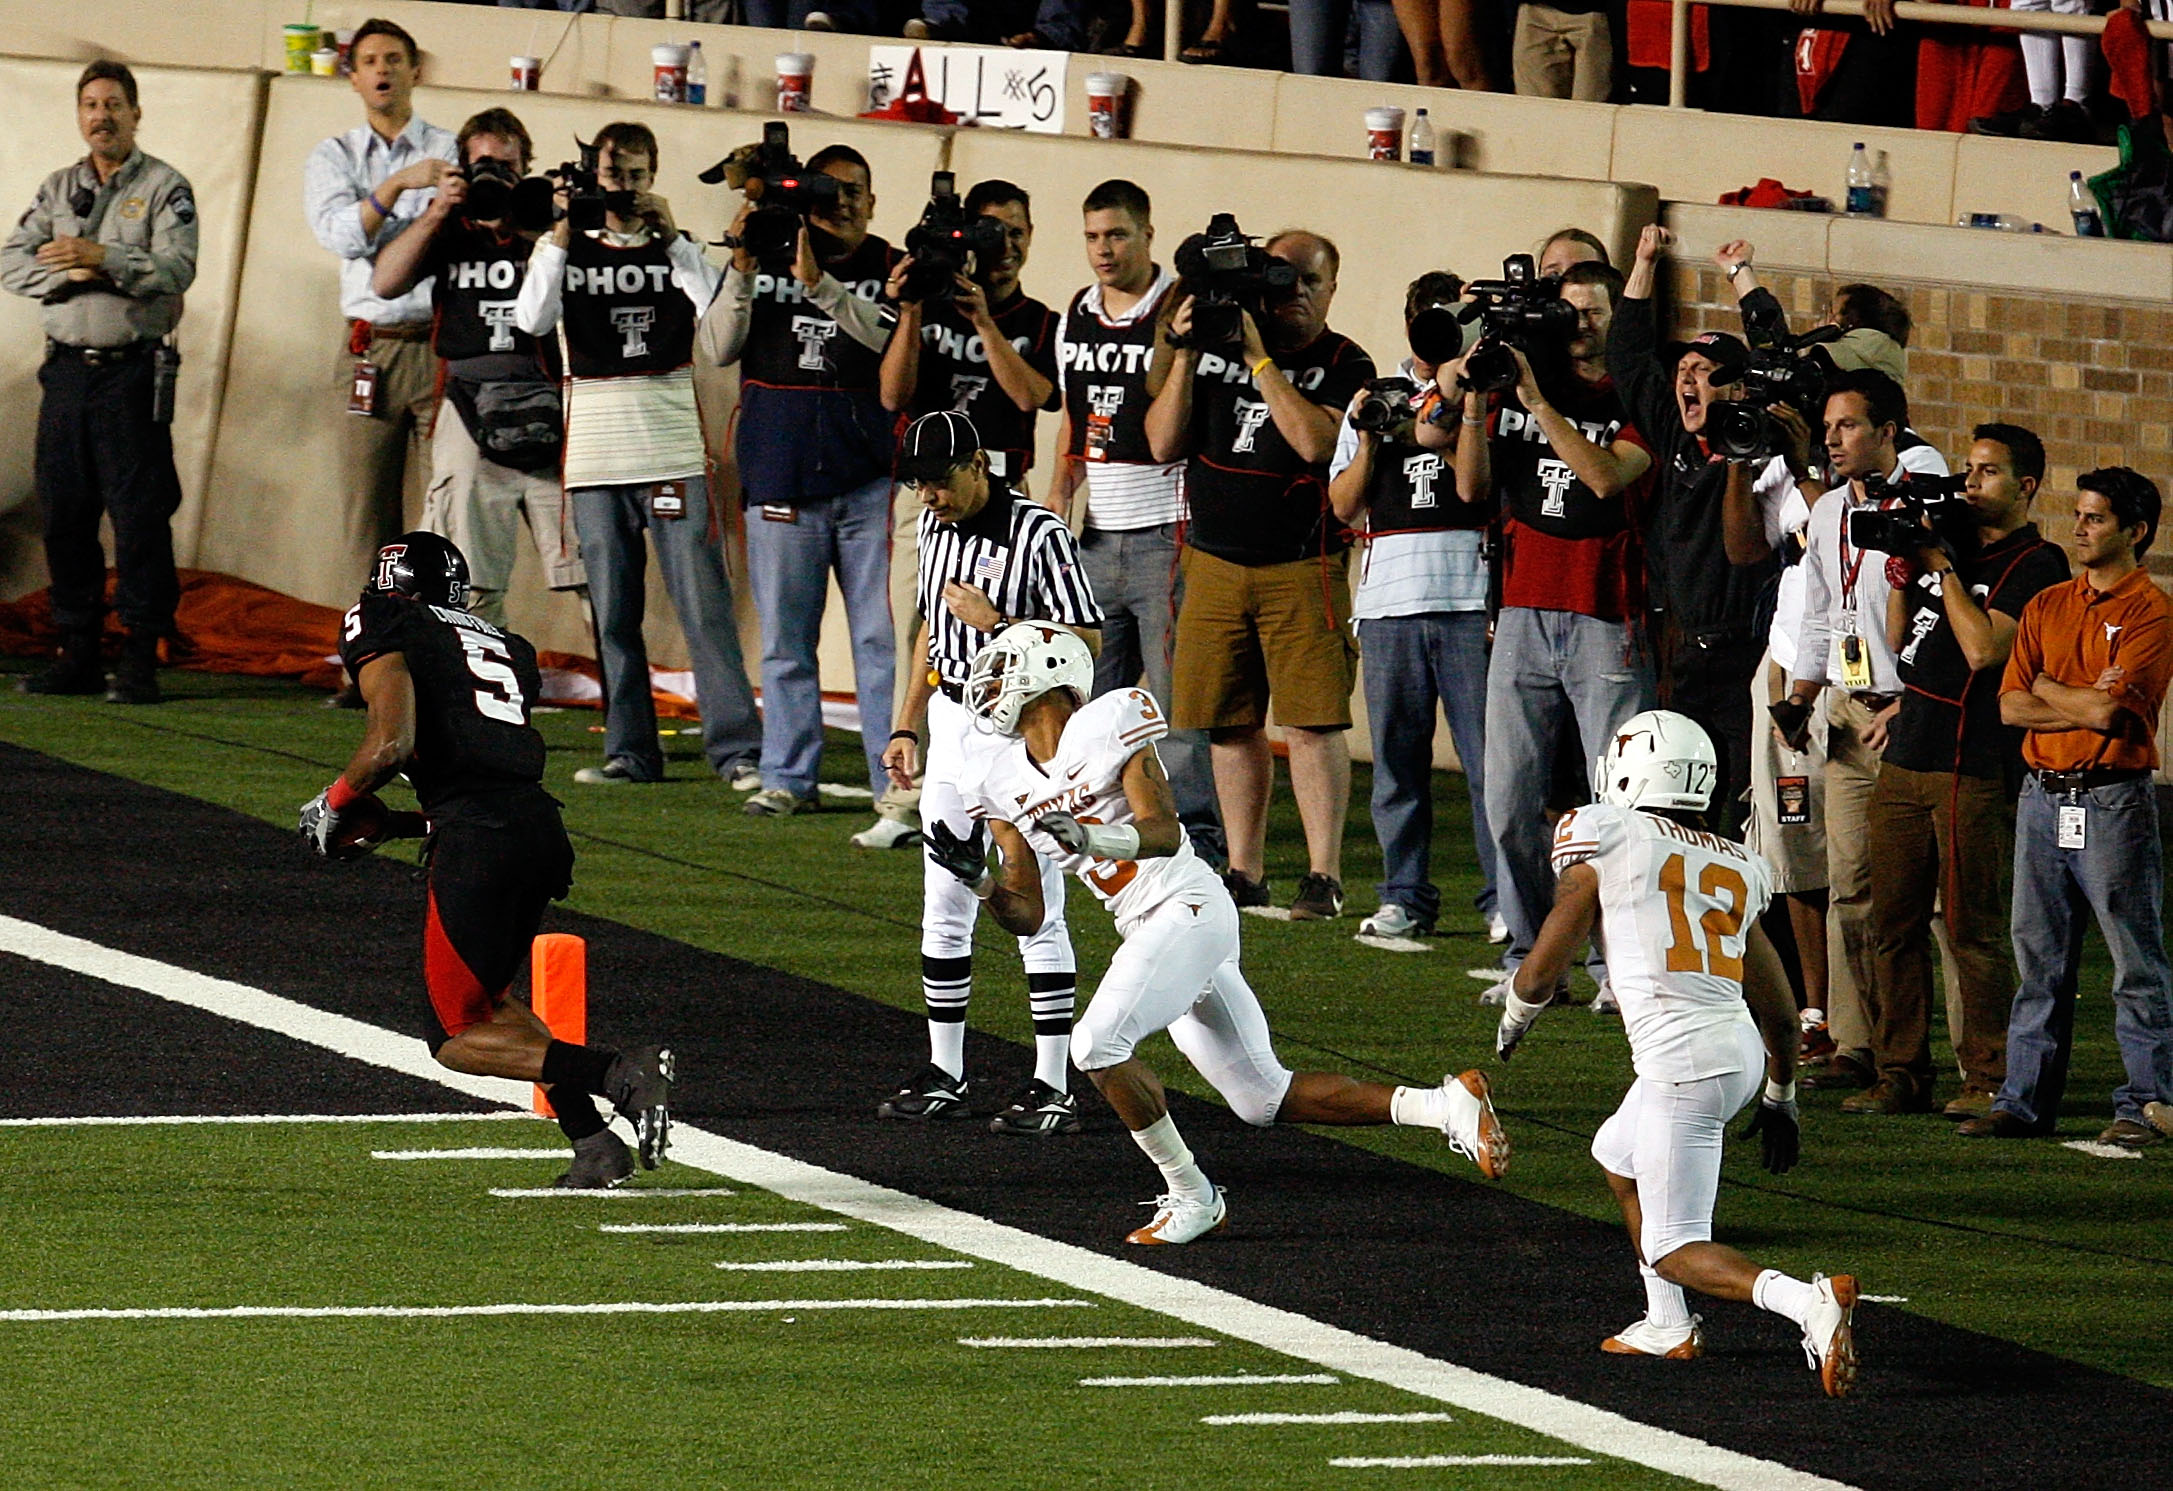 LUBBOCK, TX - NOVEMBER 01:  Michael Crabtree #5 of the Texas Tech Red Raiders carries the ball into the end zone to score the winning touchdown during the game against the Texas Longhorns on November 1, 2008 at Jones Stadium in Lubbock, Texas.  (Photo by